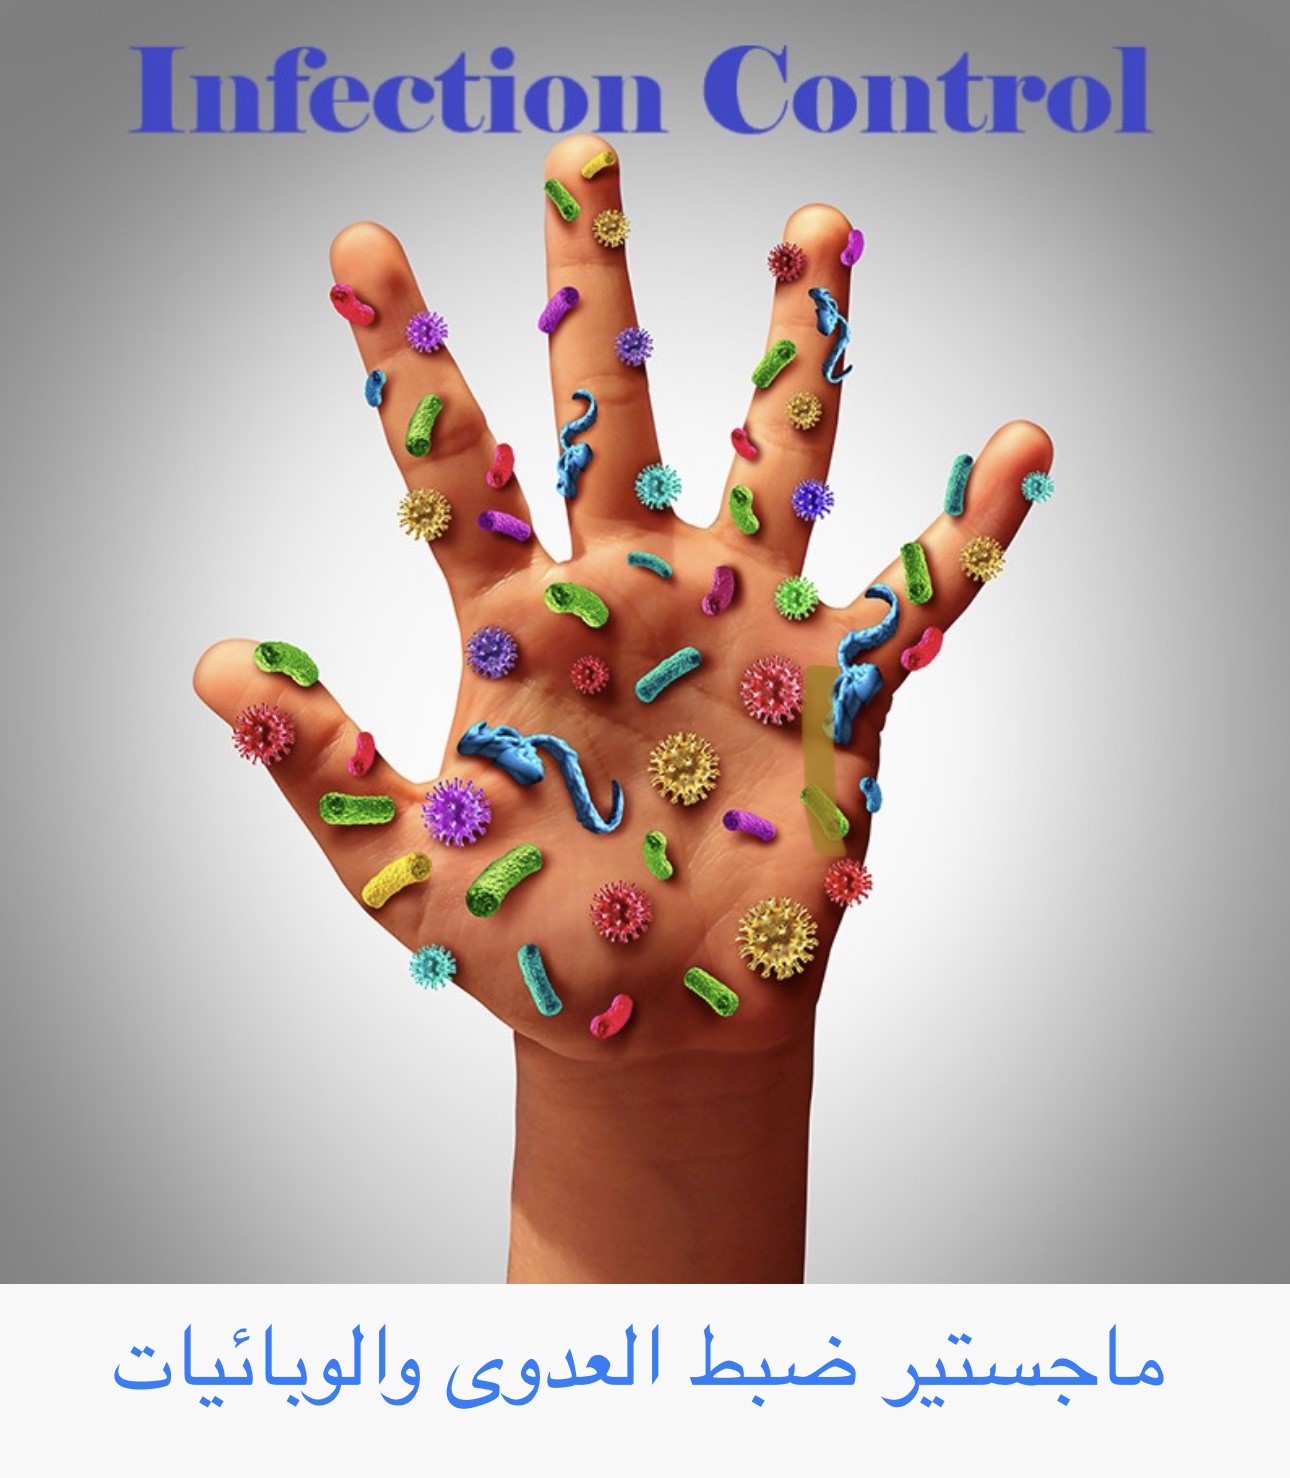 infection-control1.jpg